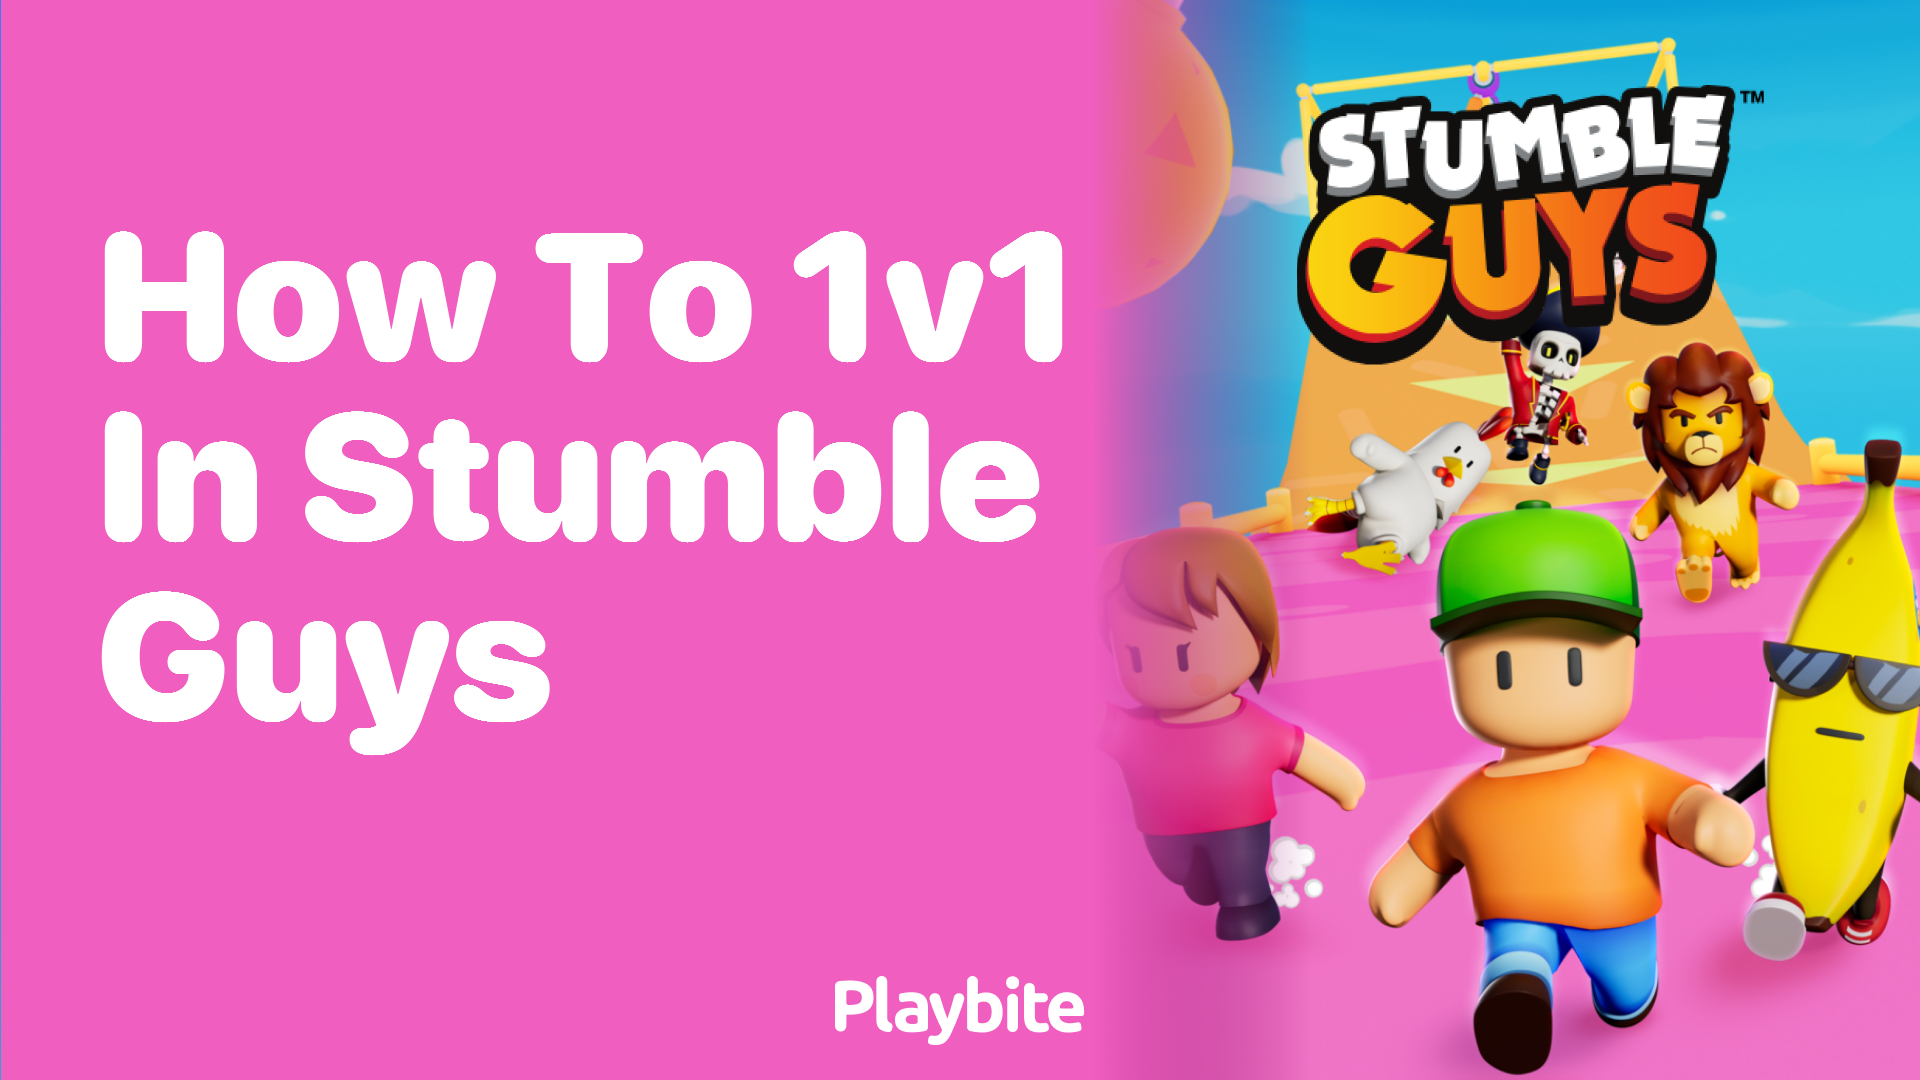 How to 1v1 in Stumble Guys?